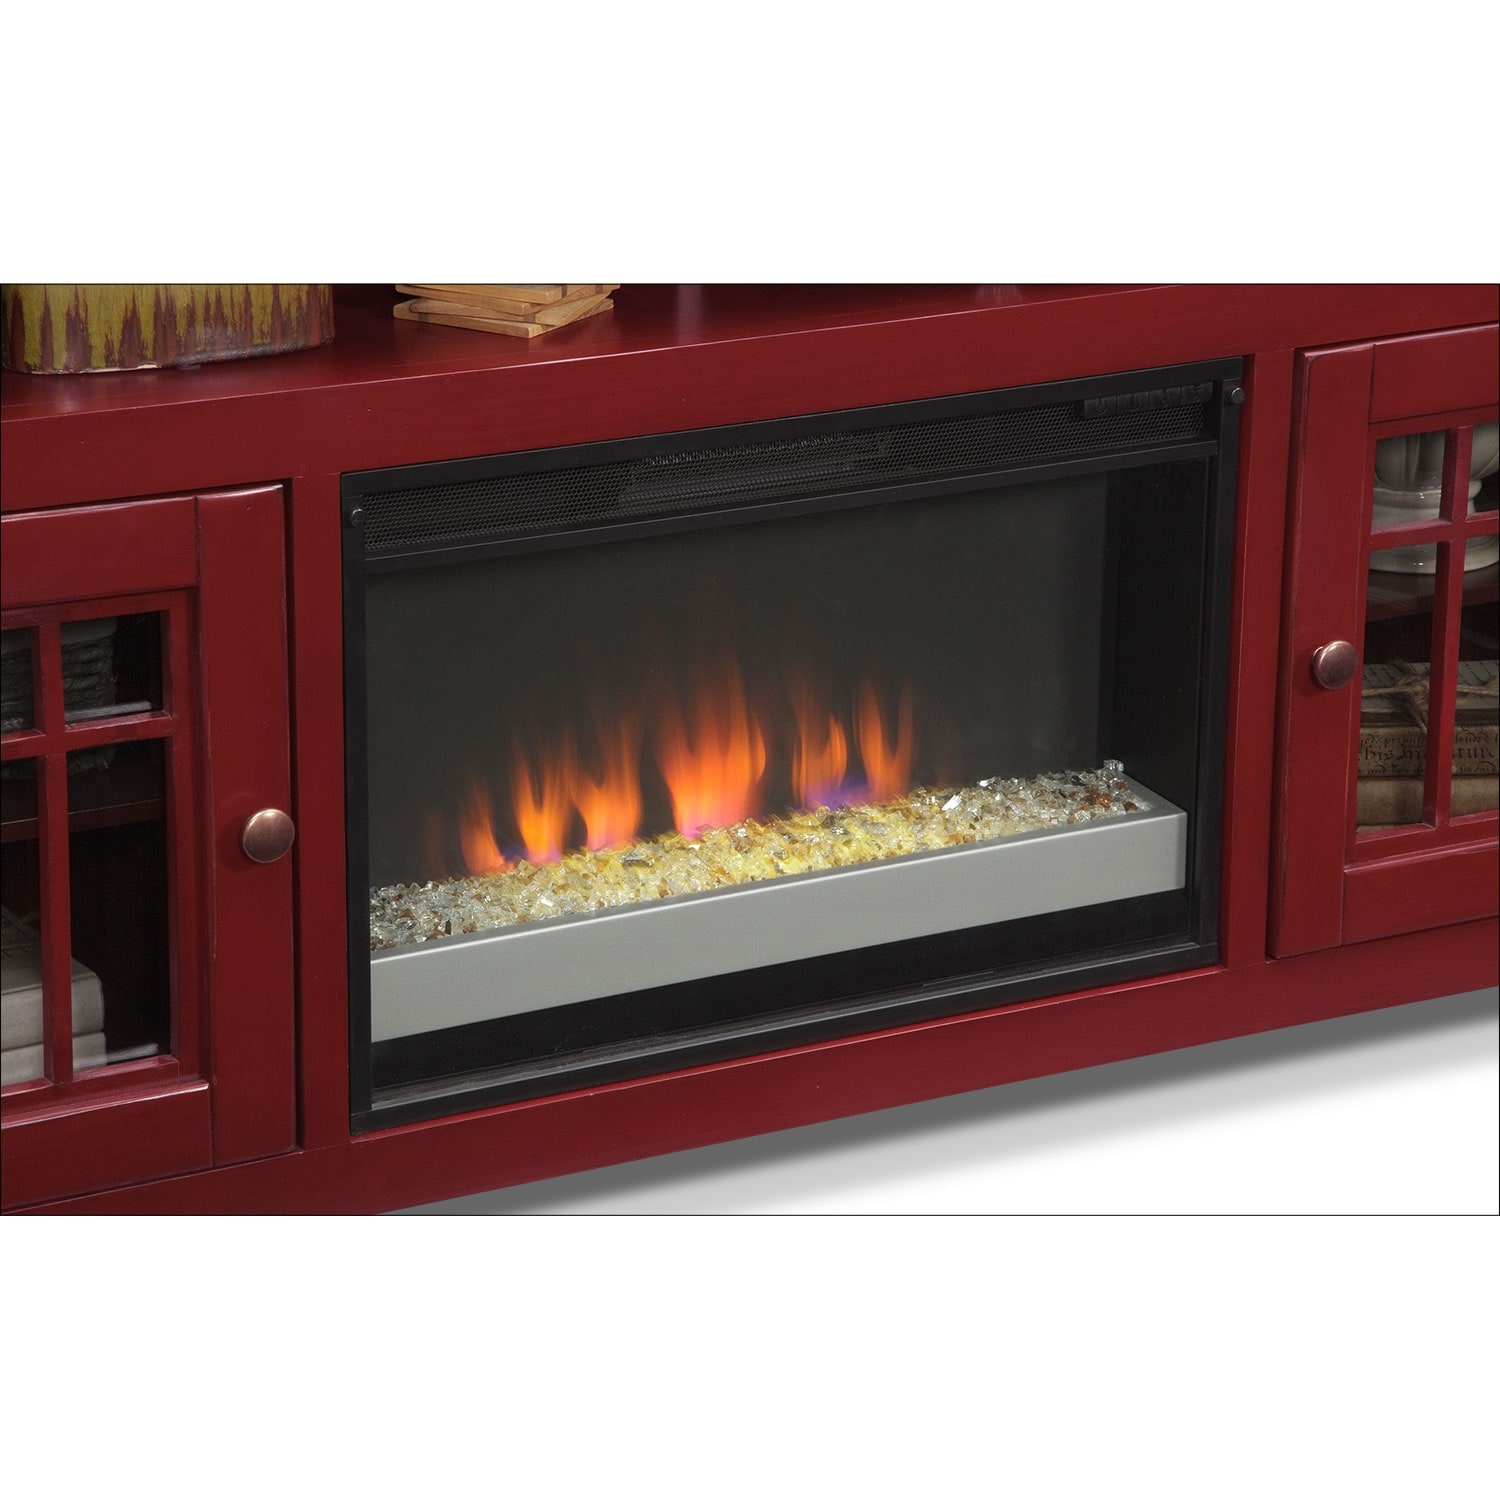 Merrick 74" Fireplace TV Stand with Contemporary Insert Red